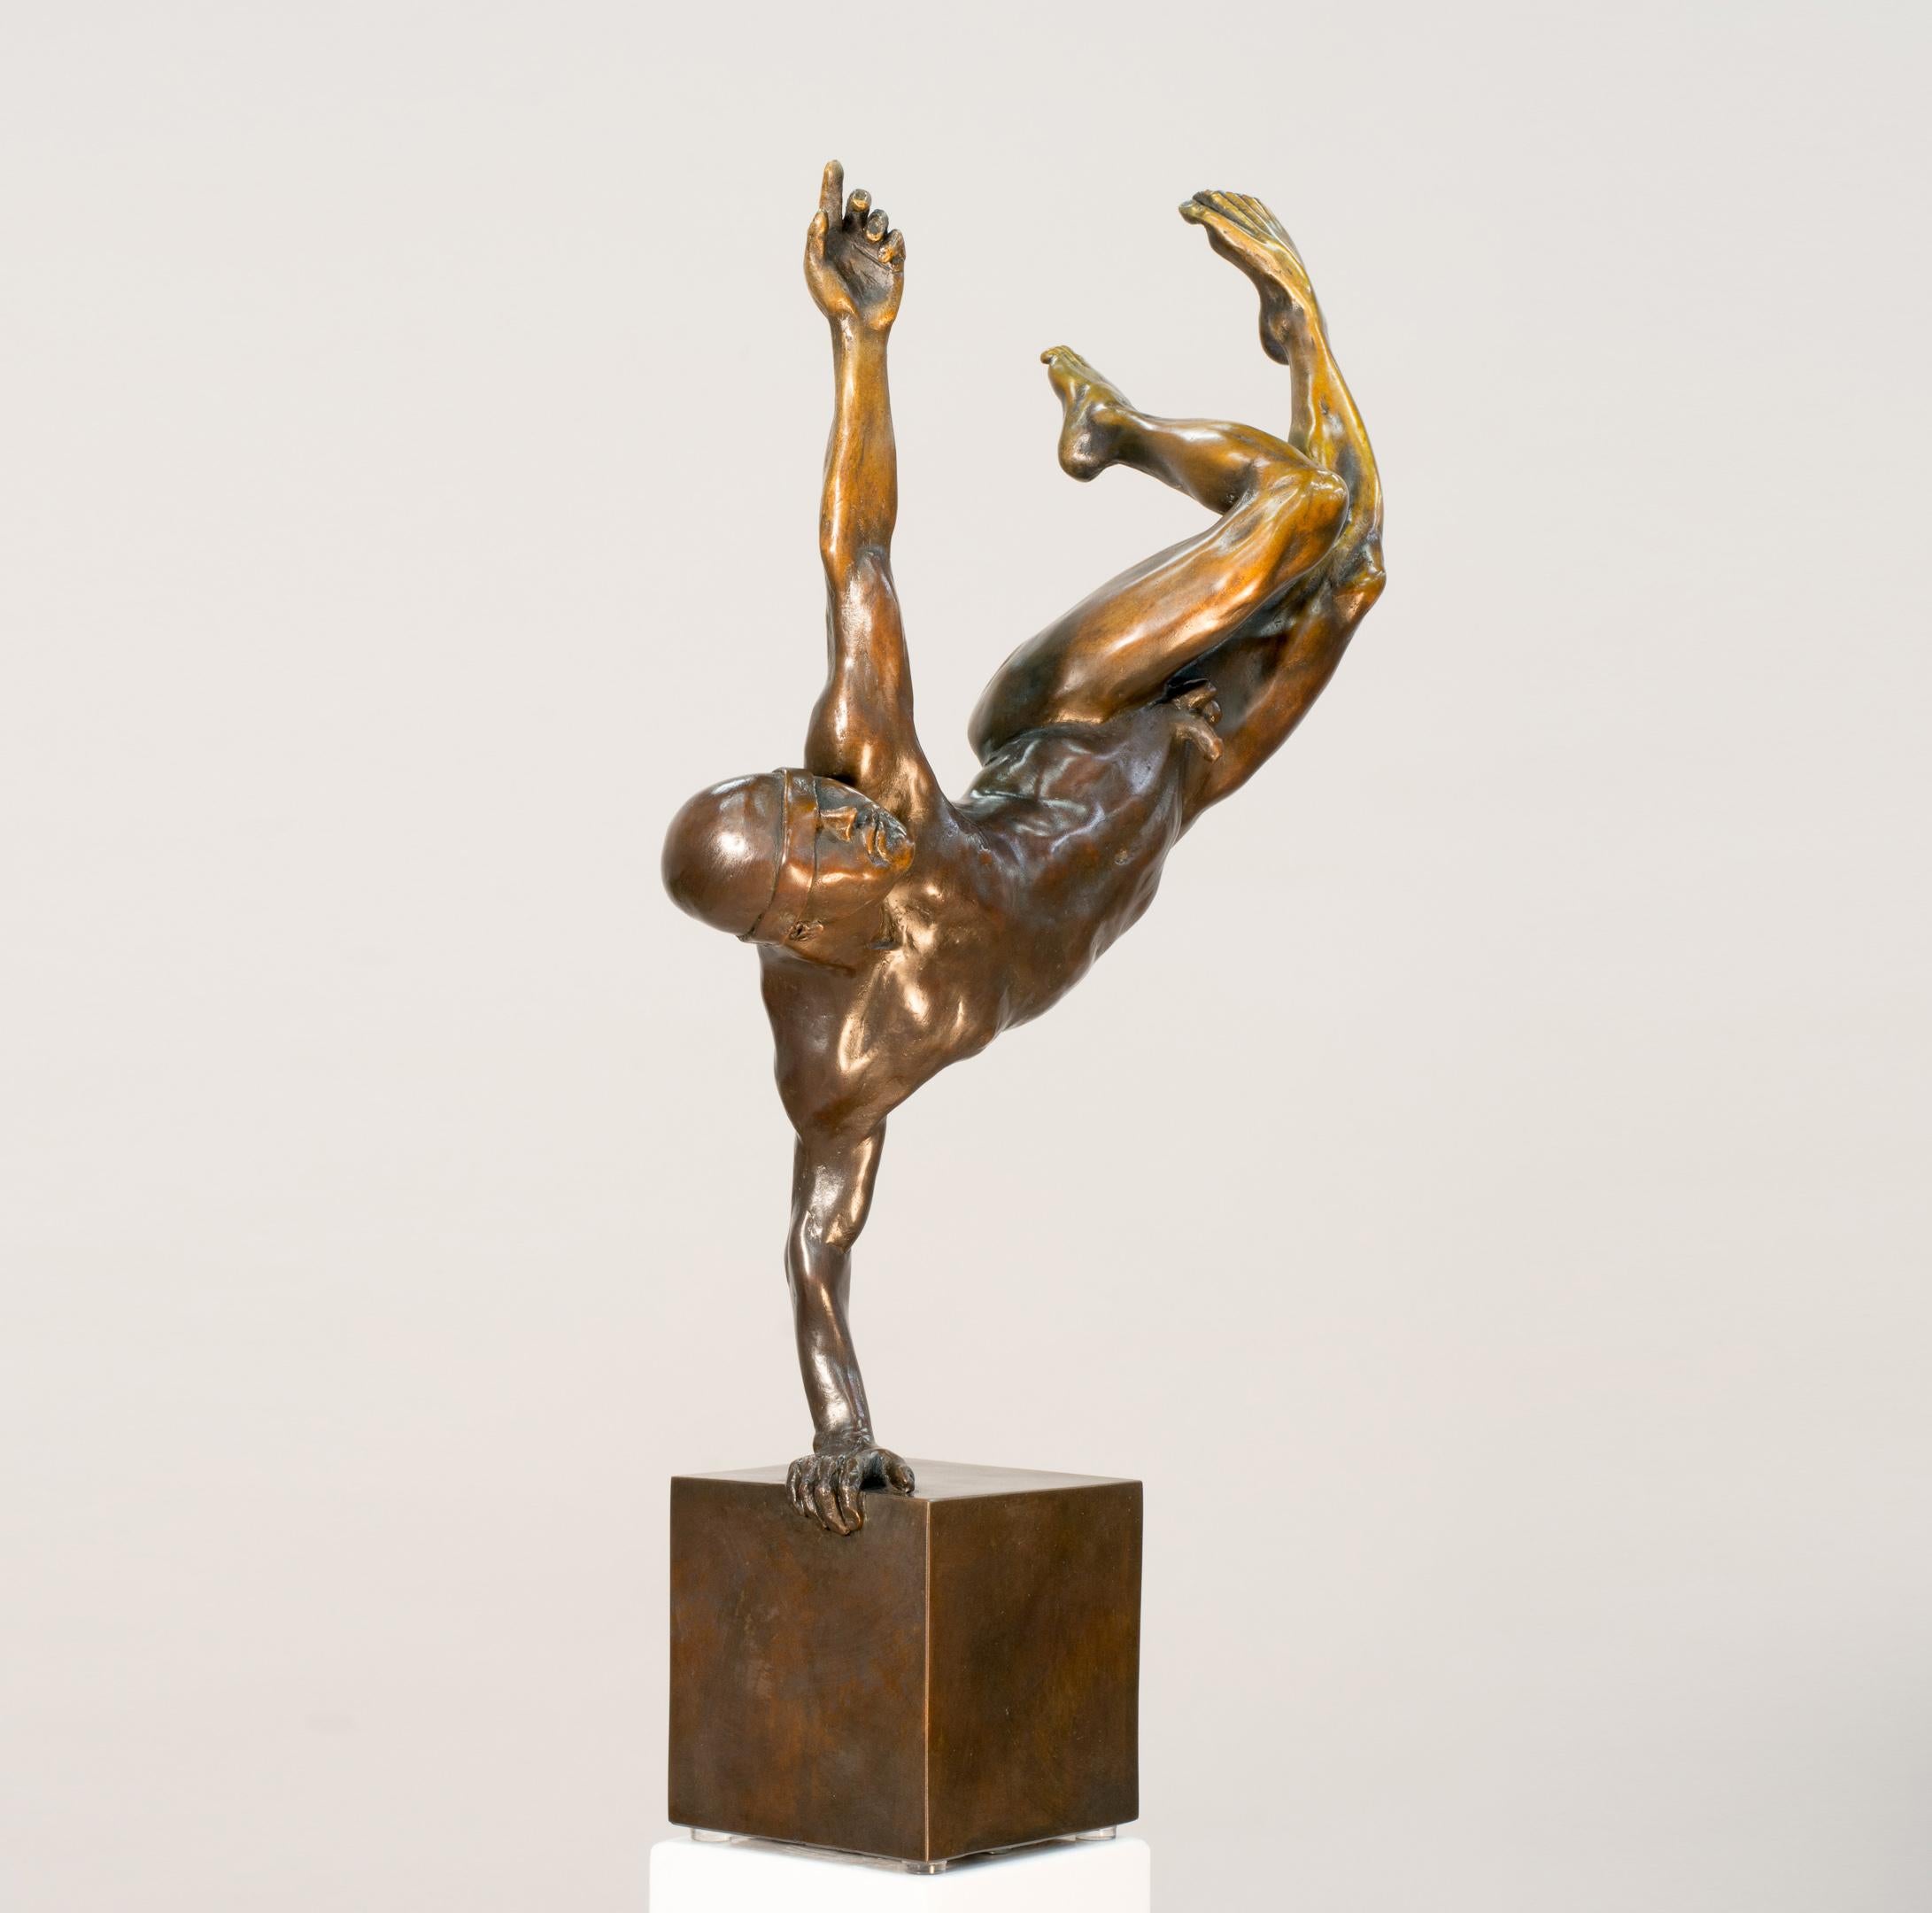 Yearning 2/9 - male, nude, figurative, statuette, bronze sculpture - Sculpture by W.W. Hung